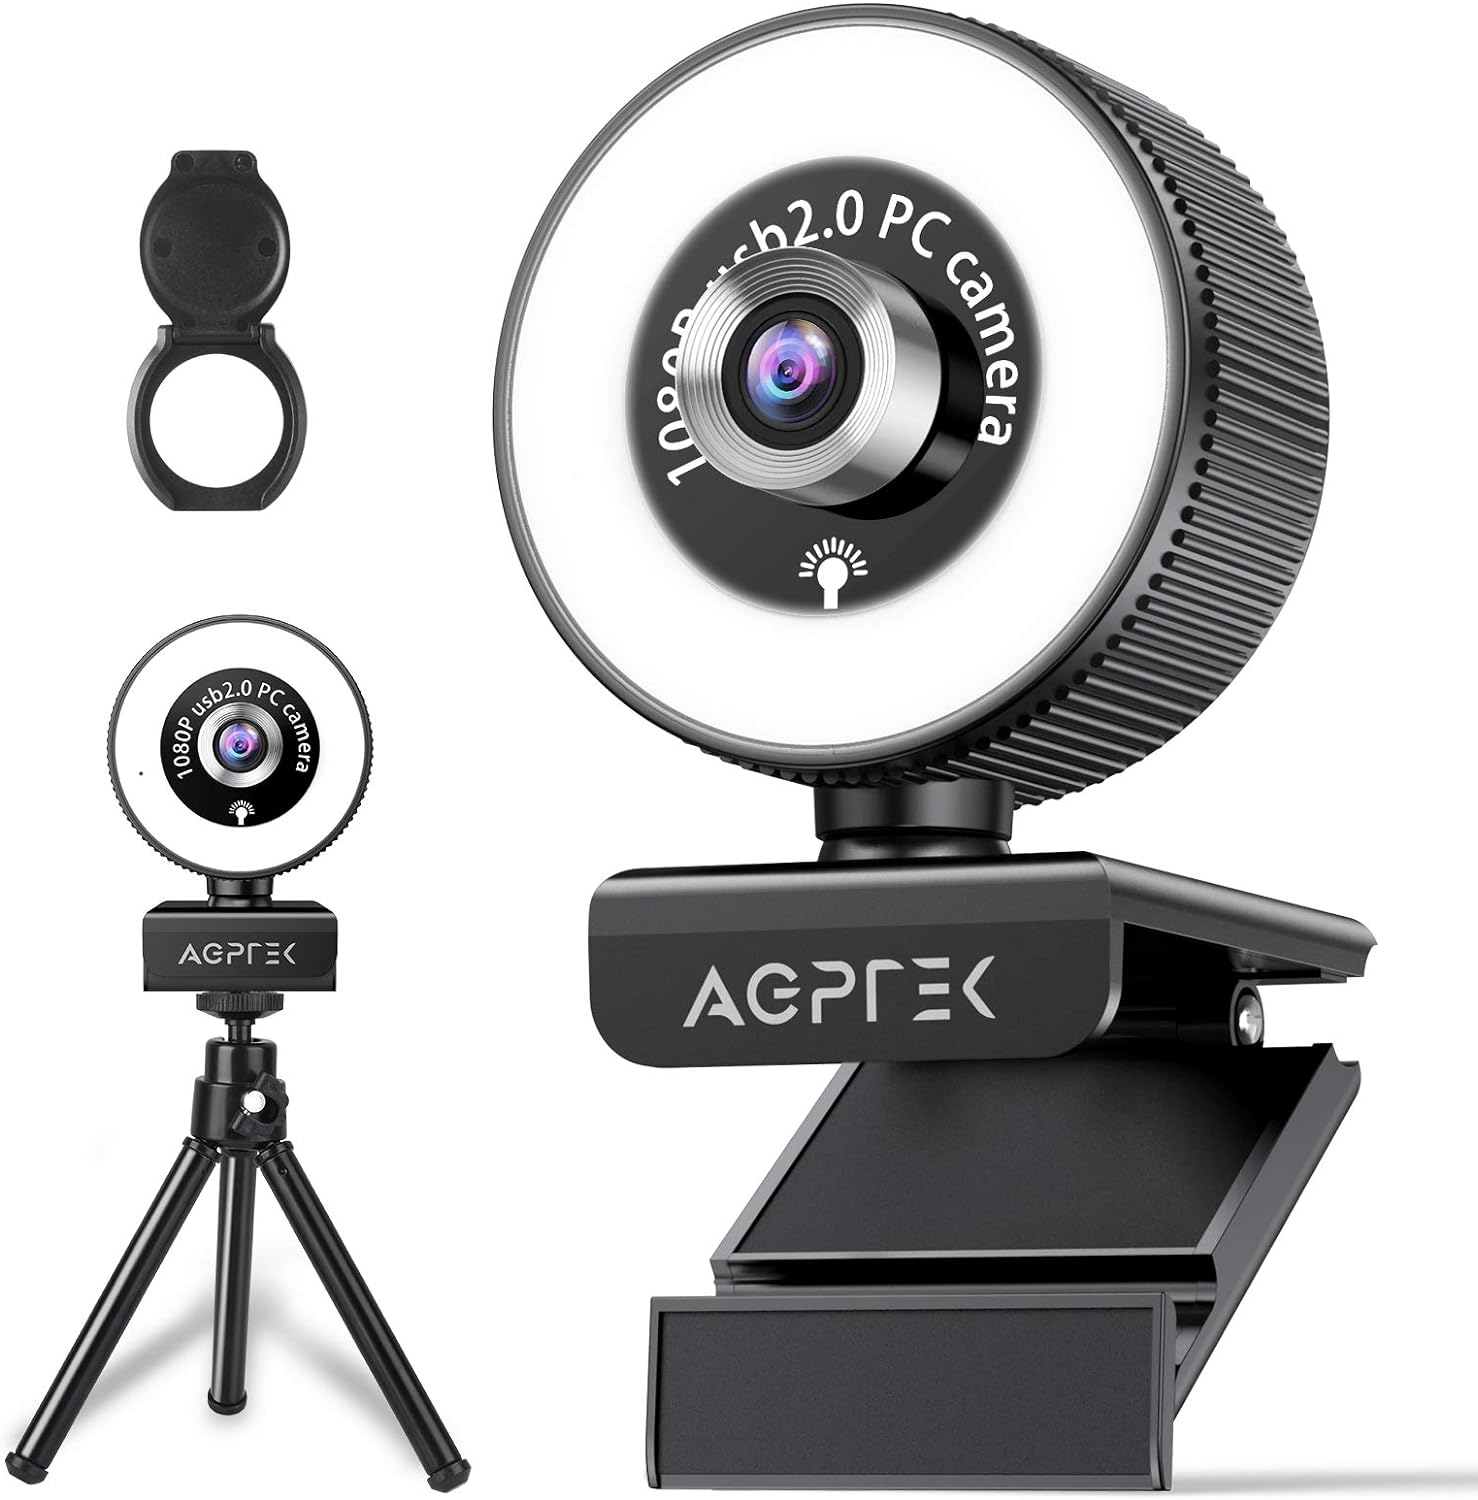 Webcam with Microphone and Tripod for PC,1080P Webcam with Privacy Cover,Streaming Camera with Ring Light Adjustable Brightness,USB Webcam for Conference,Studying,Zoom YouTube Skype